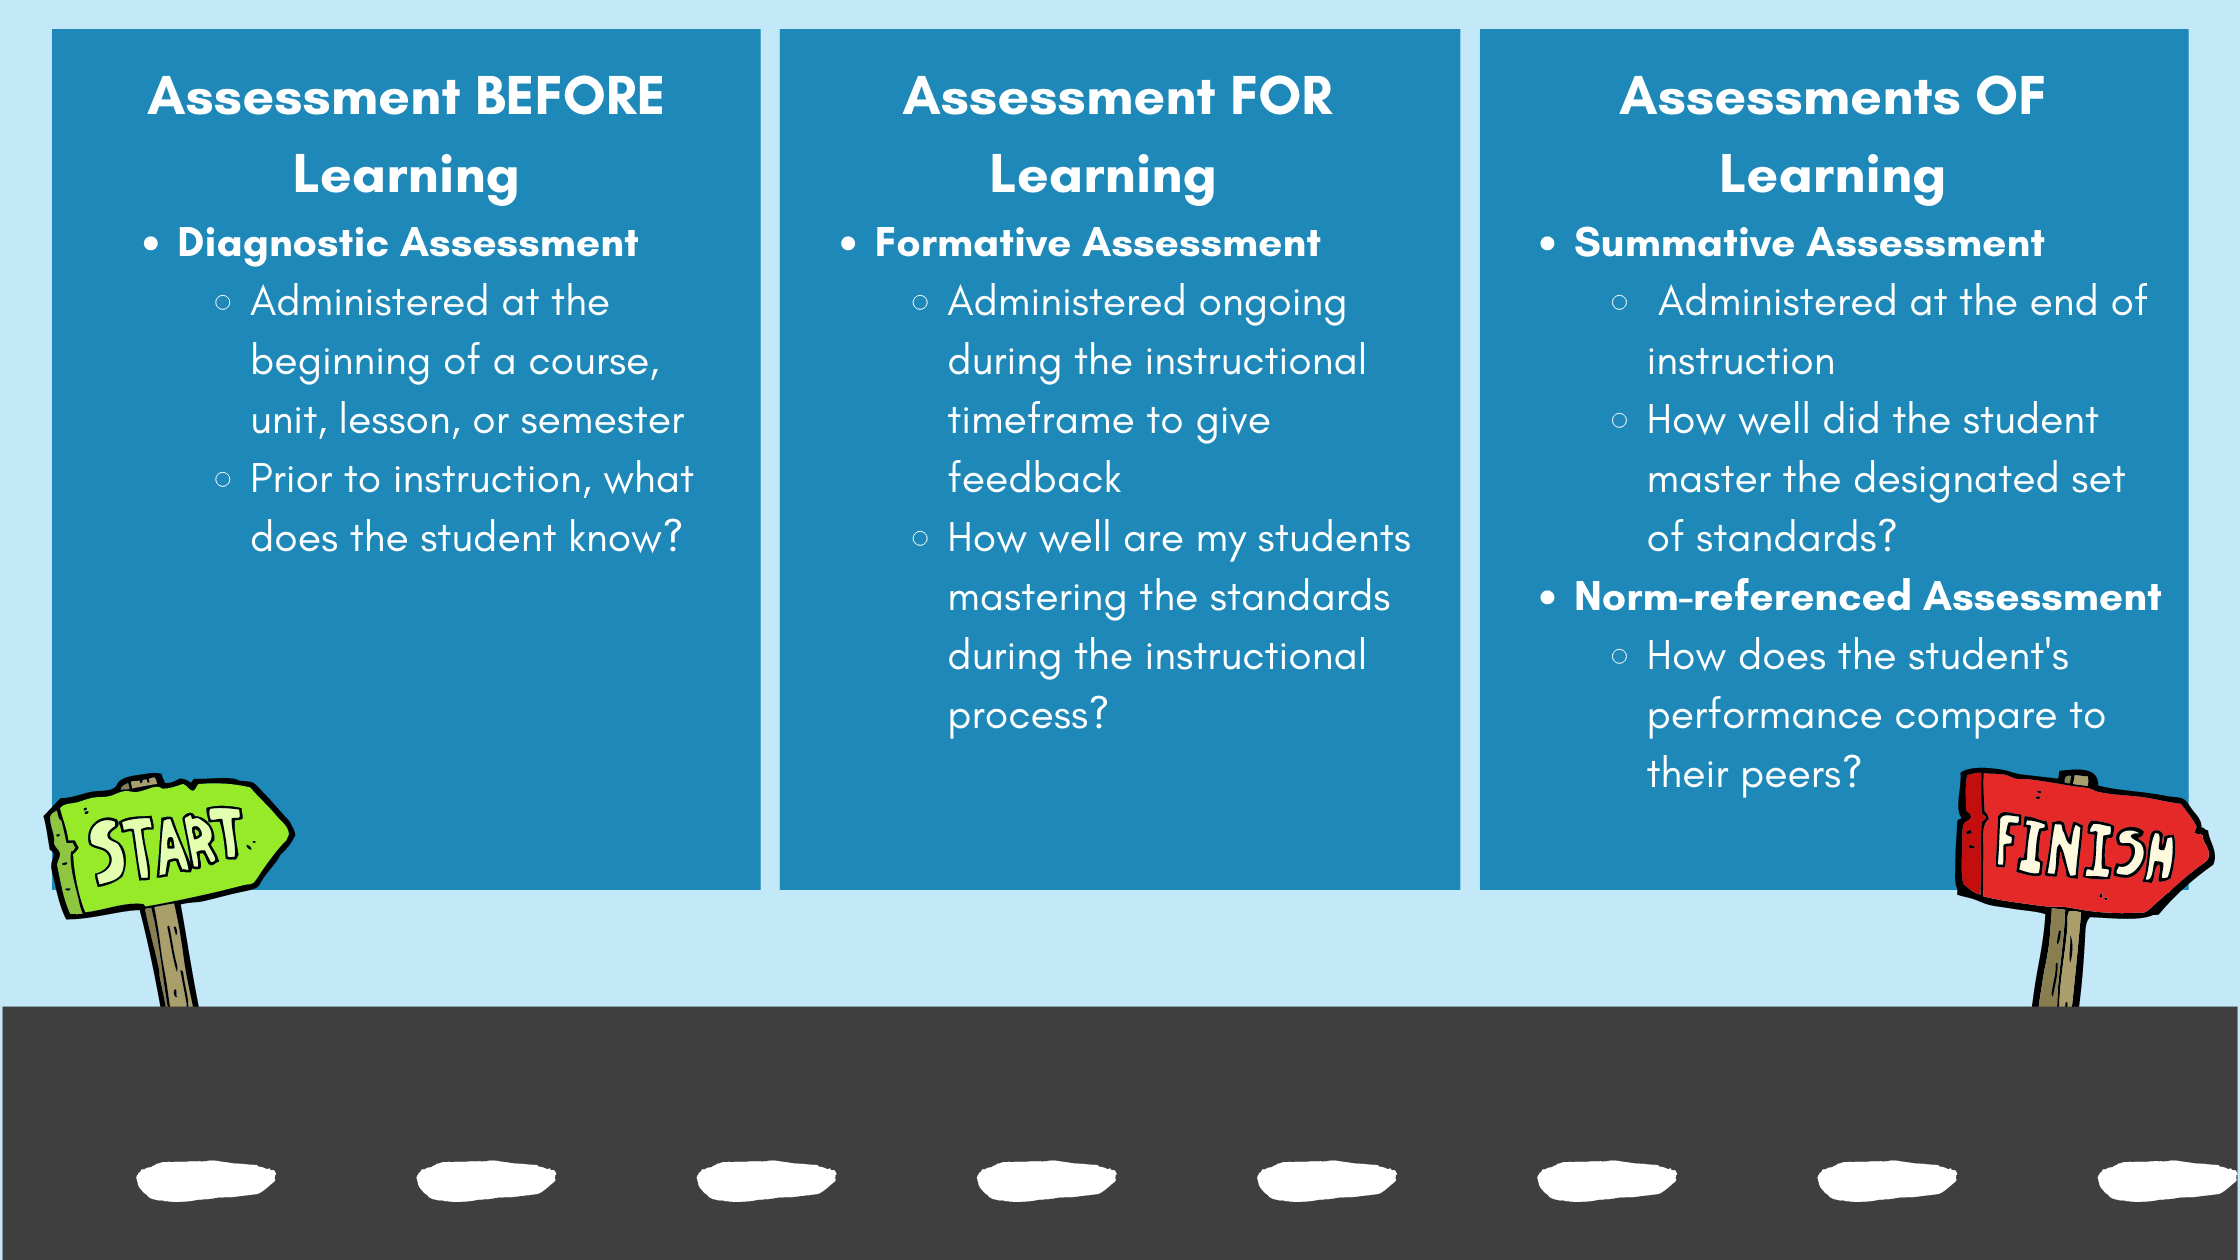 Summative assessment Assessment OF Learning Administered at the end of instruction How well did the student master the designated set of standards (3)